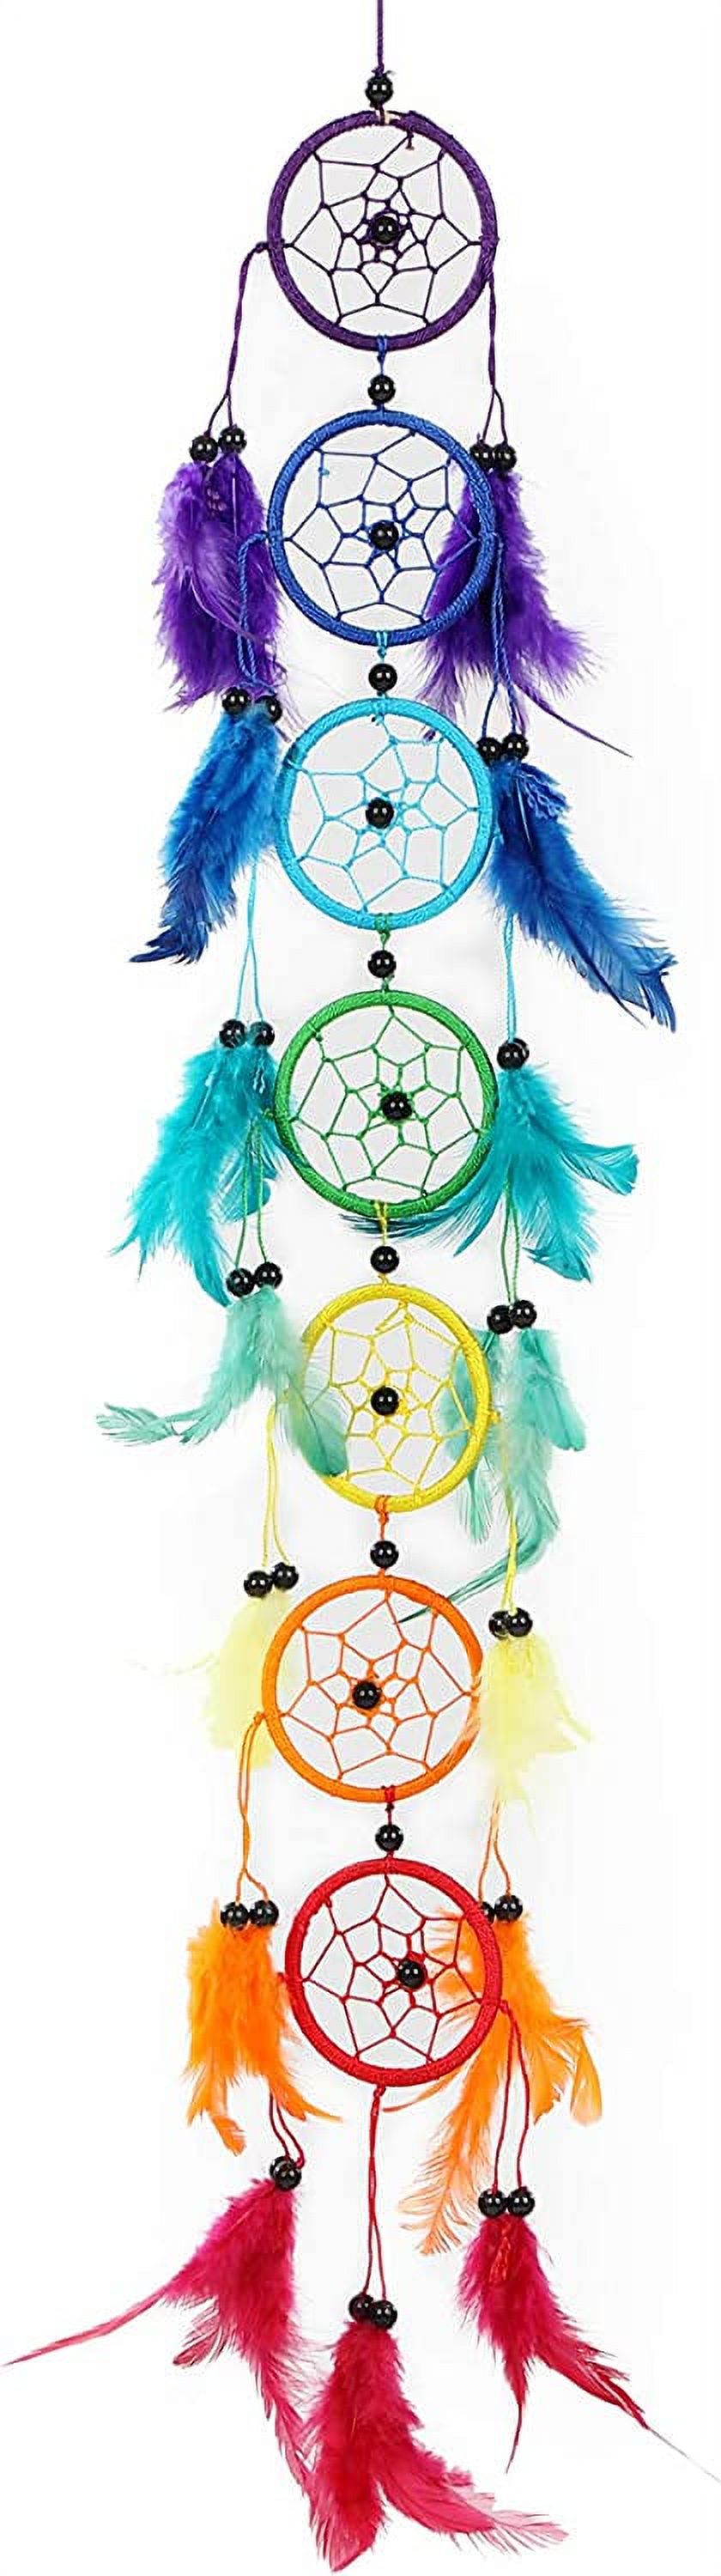 Colorful dream catcher hanging decoration, wind chime, window ...